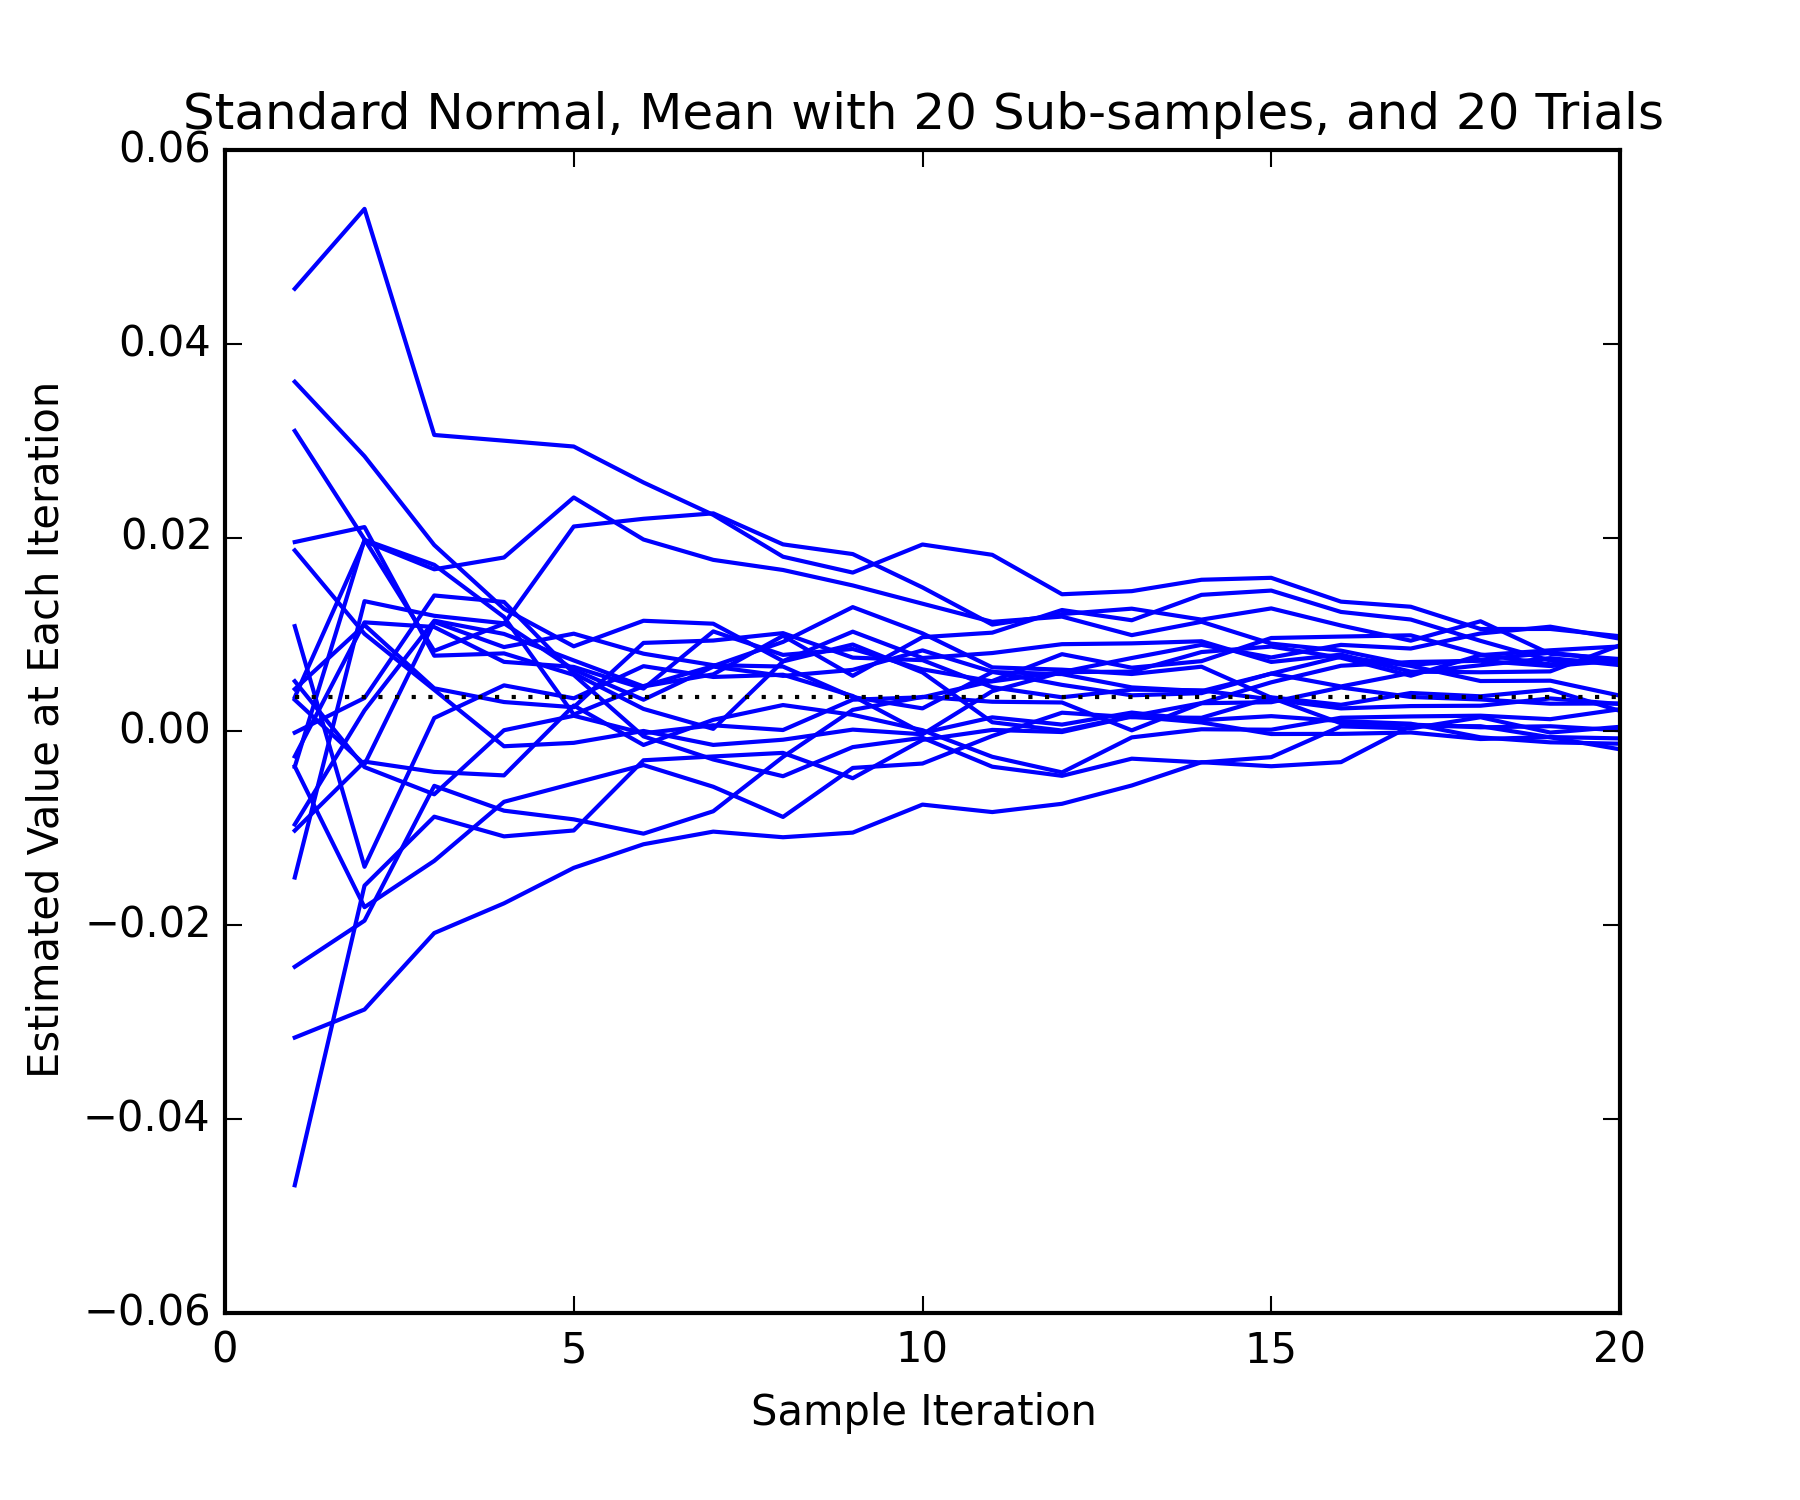 Standard normal, mean with 20 sub-samples and 20 trials